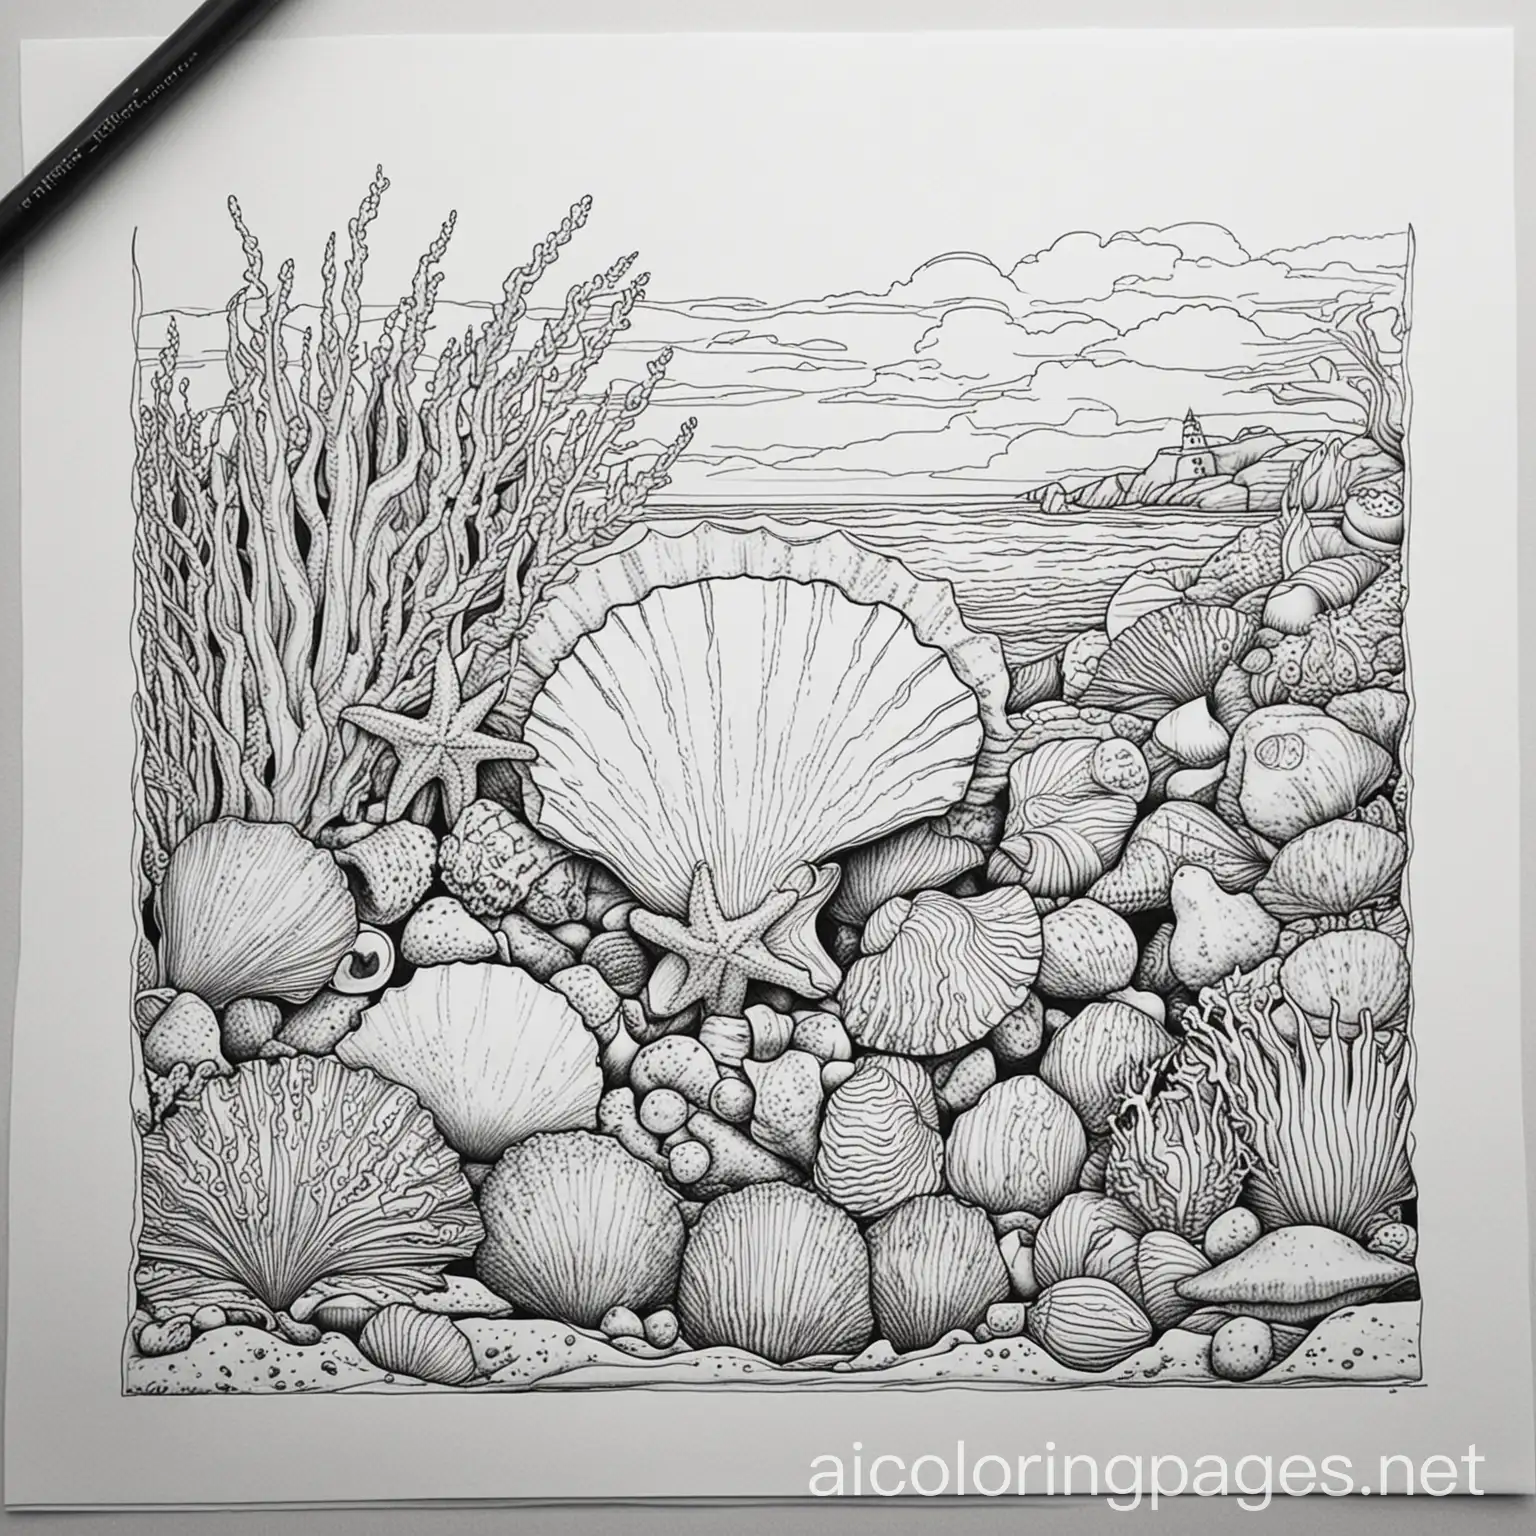 Oceanic-Seashell-Coloring-Page-for-Kids